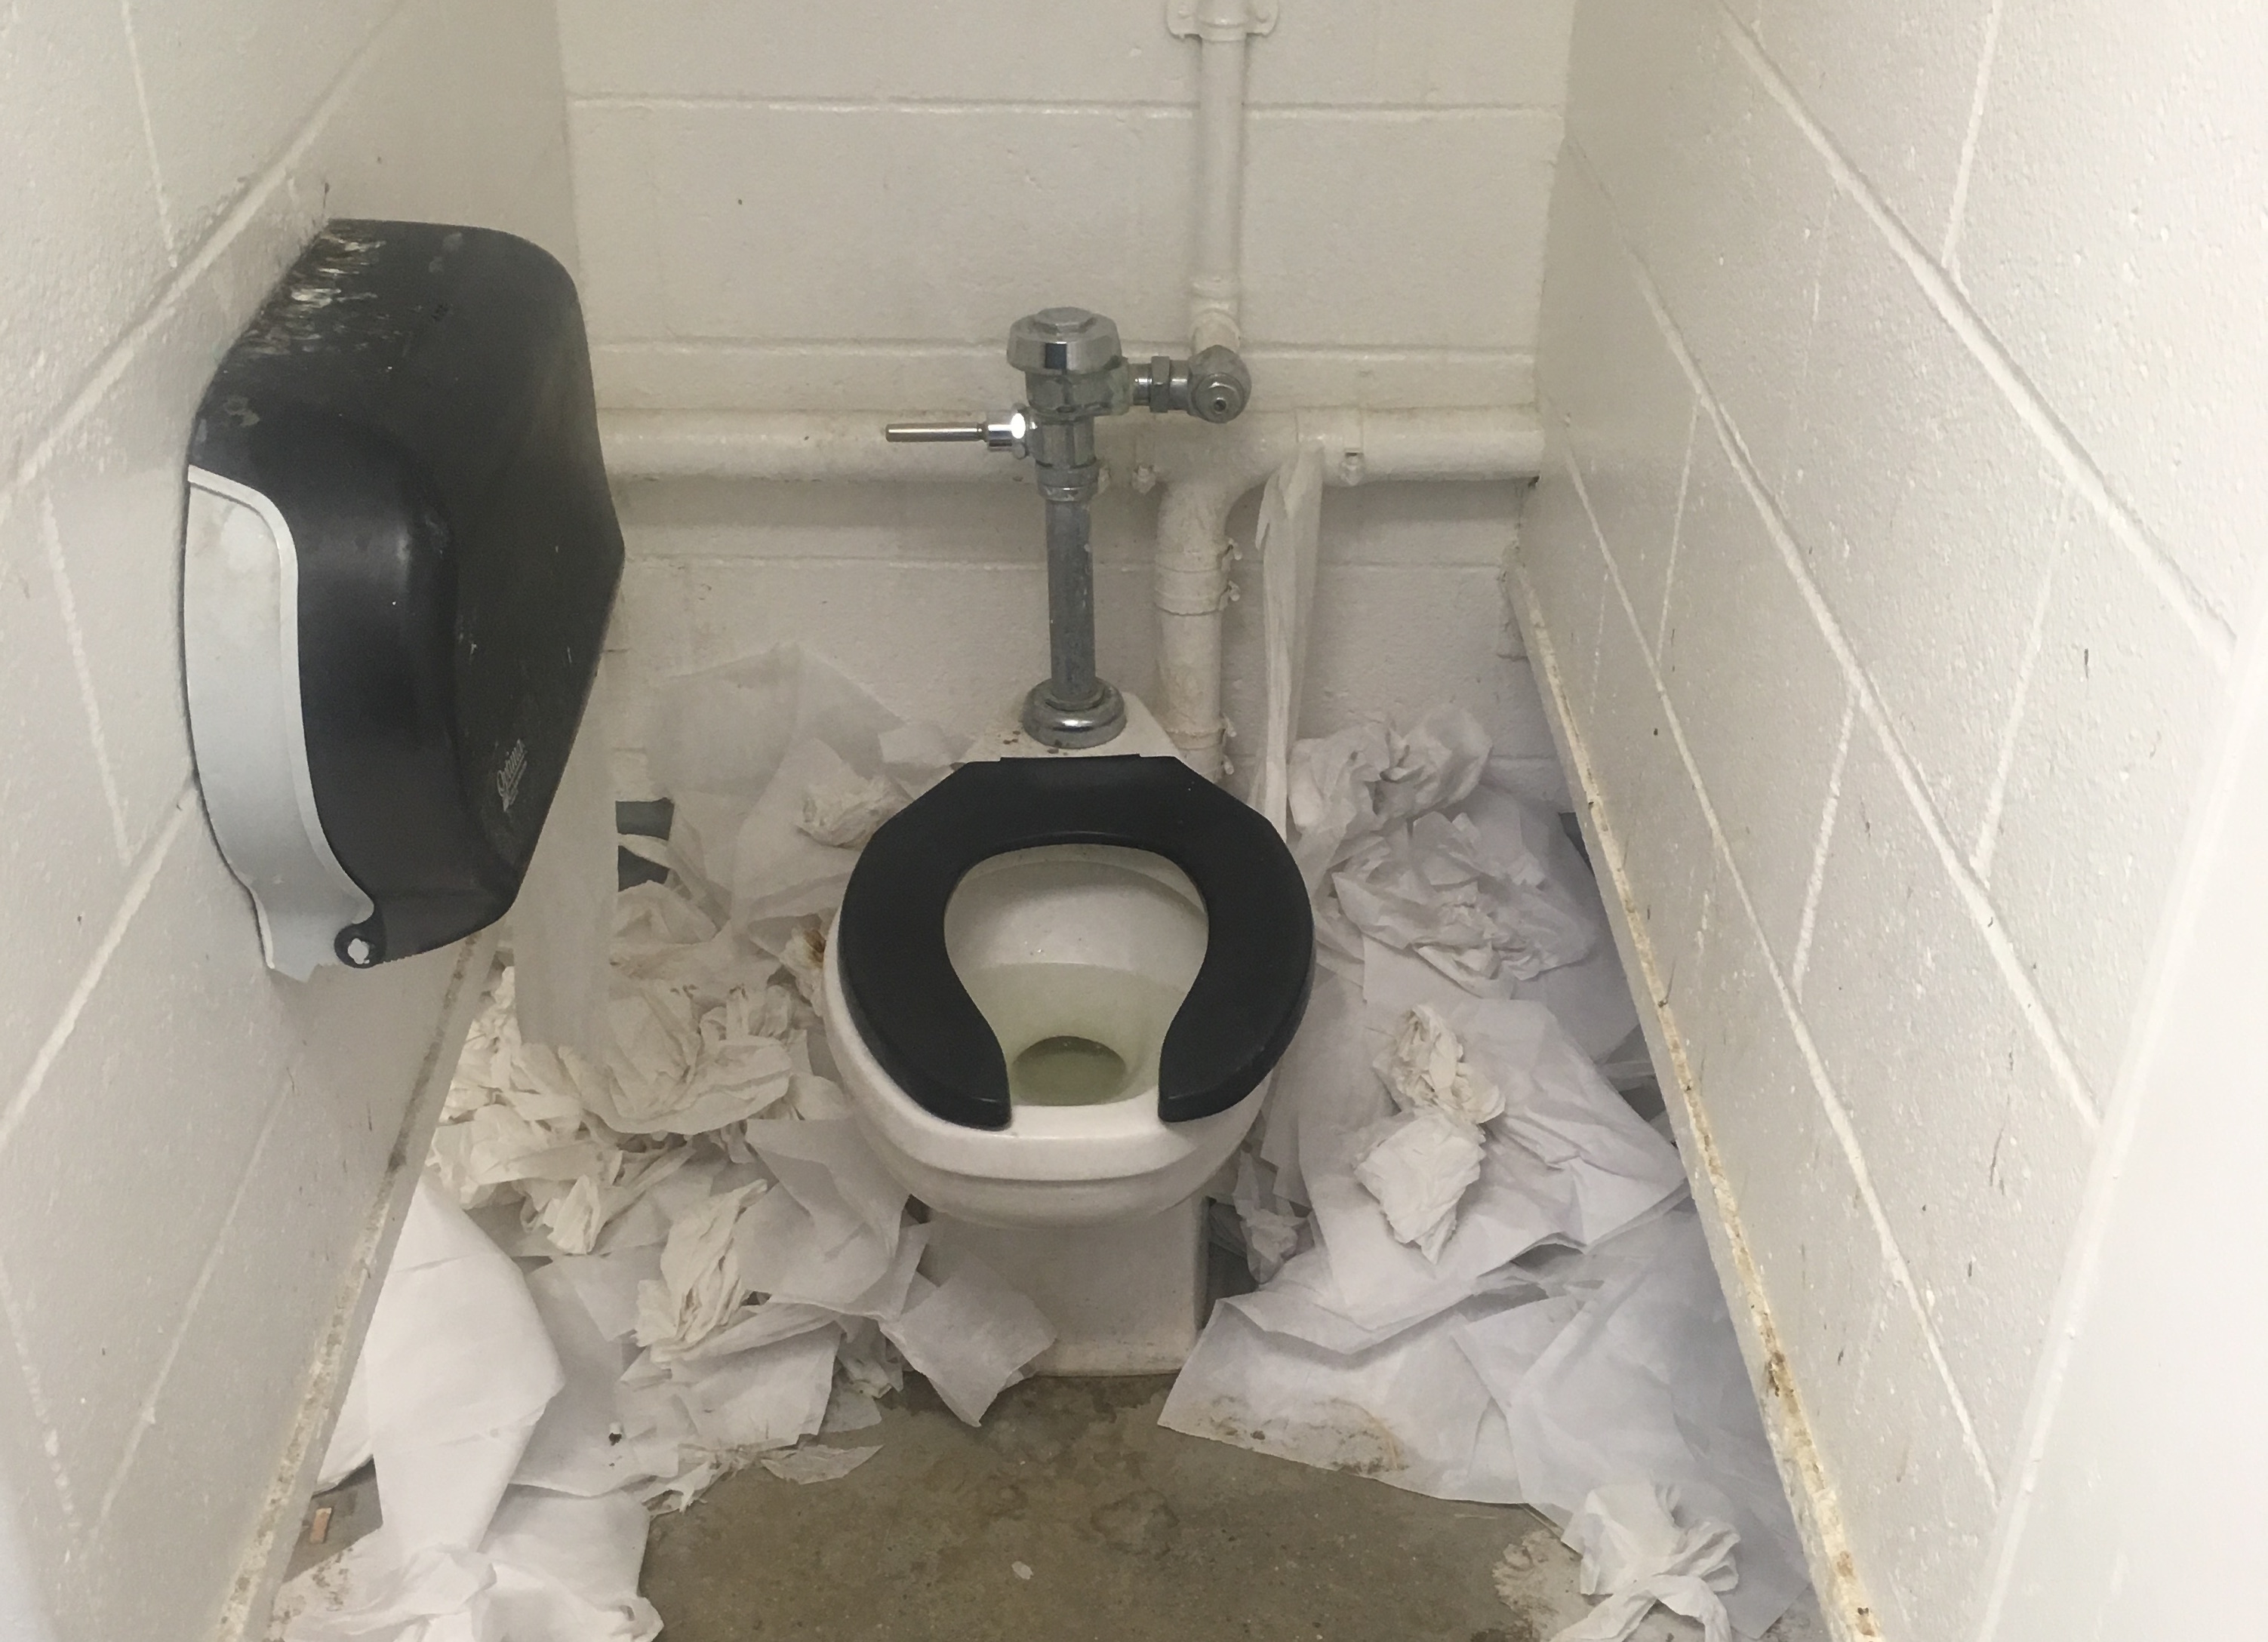 A toilet in one of the bathrooms shared by backstretch workers at Santa Anita. The picture was taken last weekend. Photo: Daniel Ross